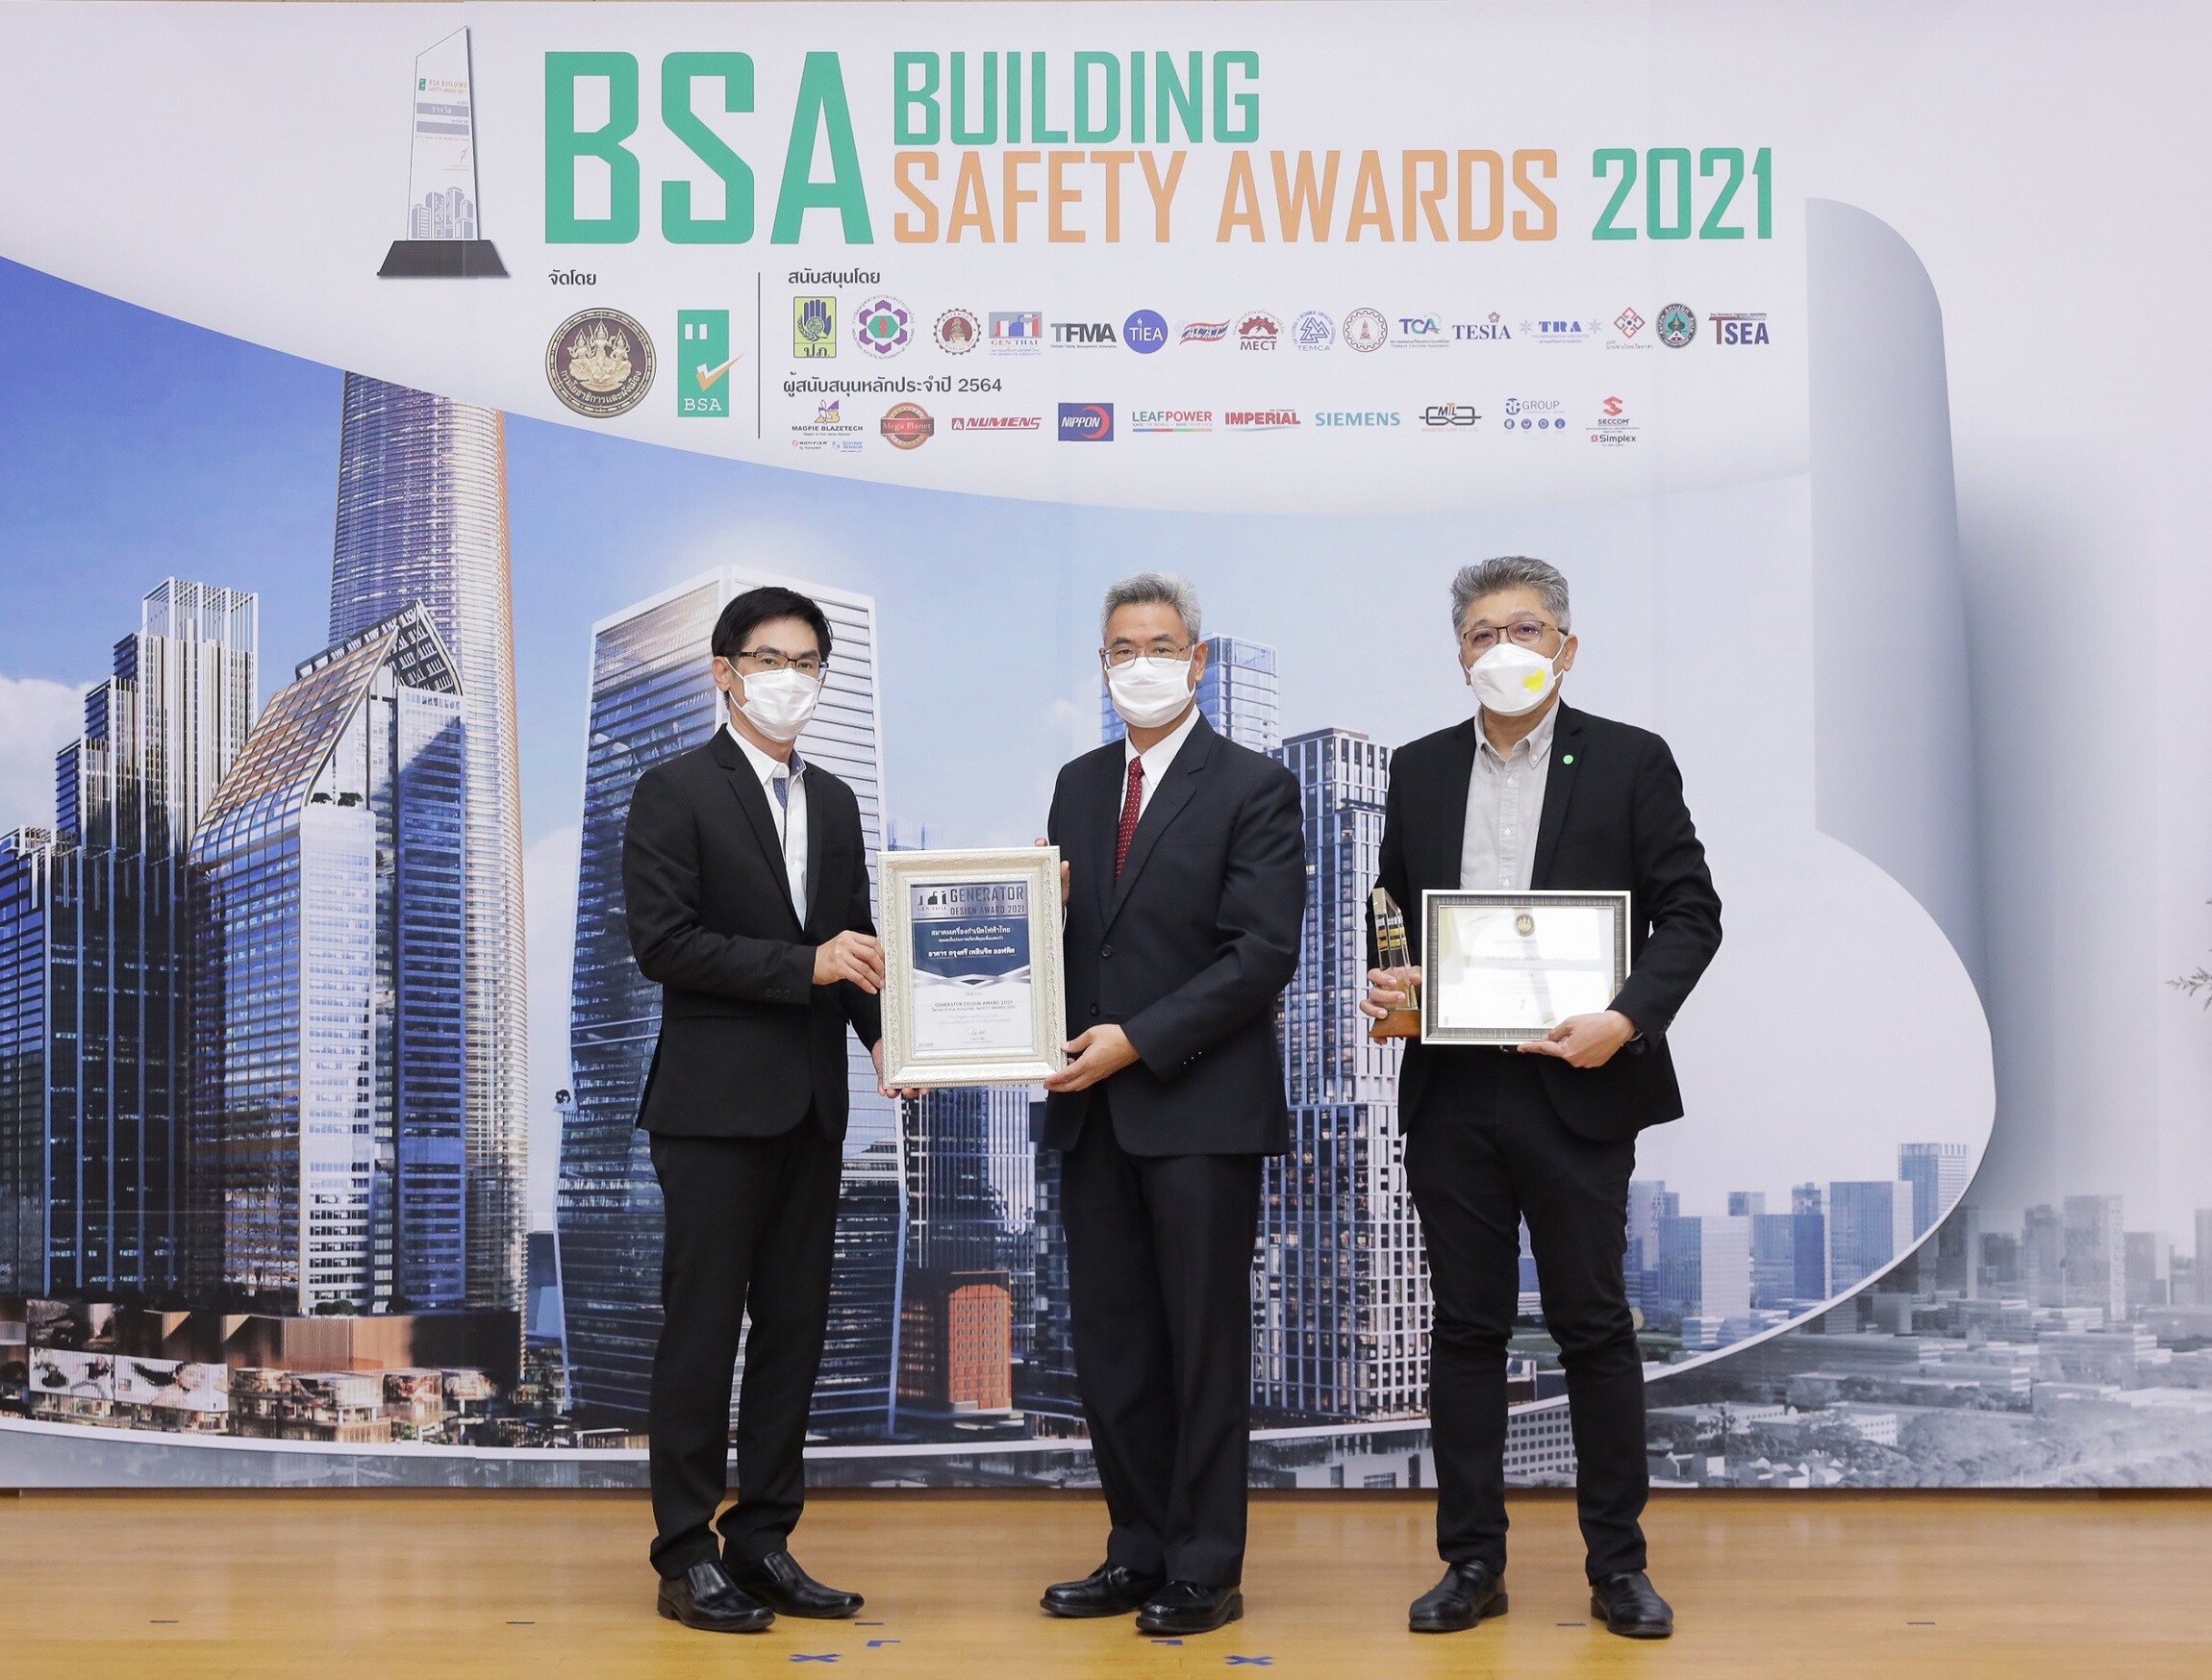 Krungsri Ploenchit Office receives GOLD award for BSA Building Safety Award 2021 for the second year